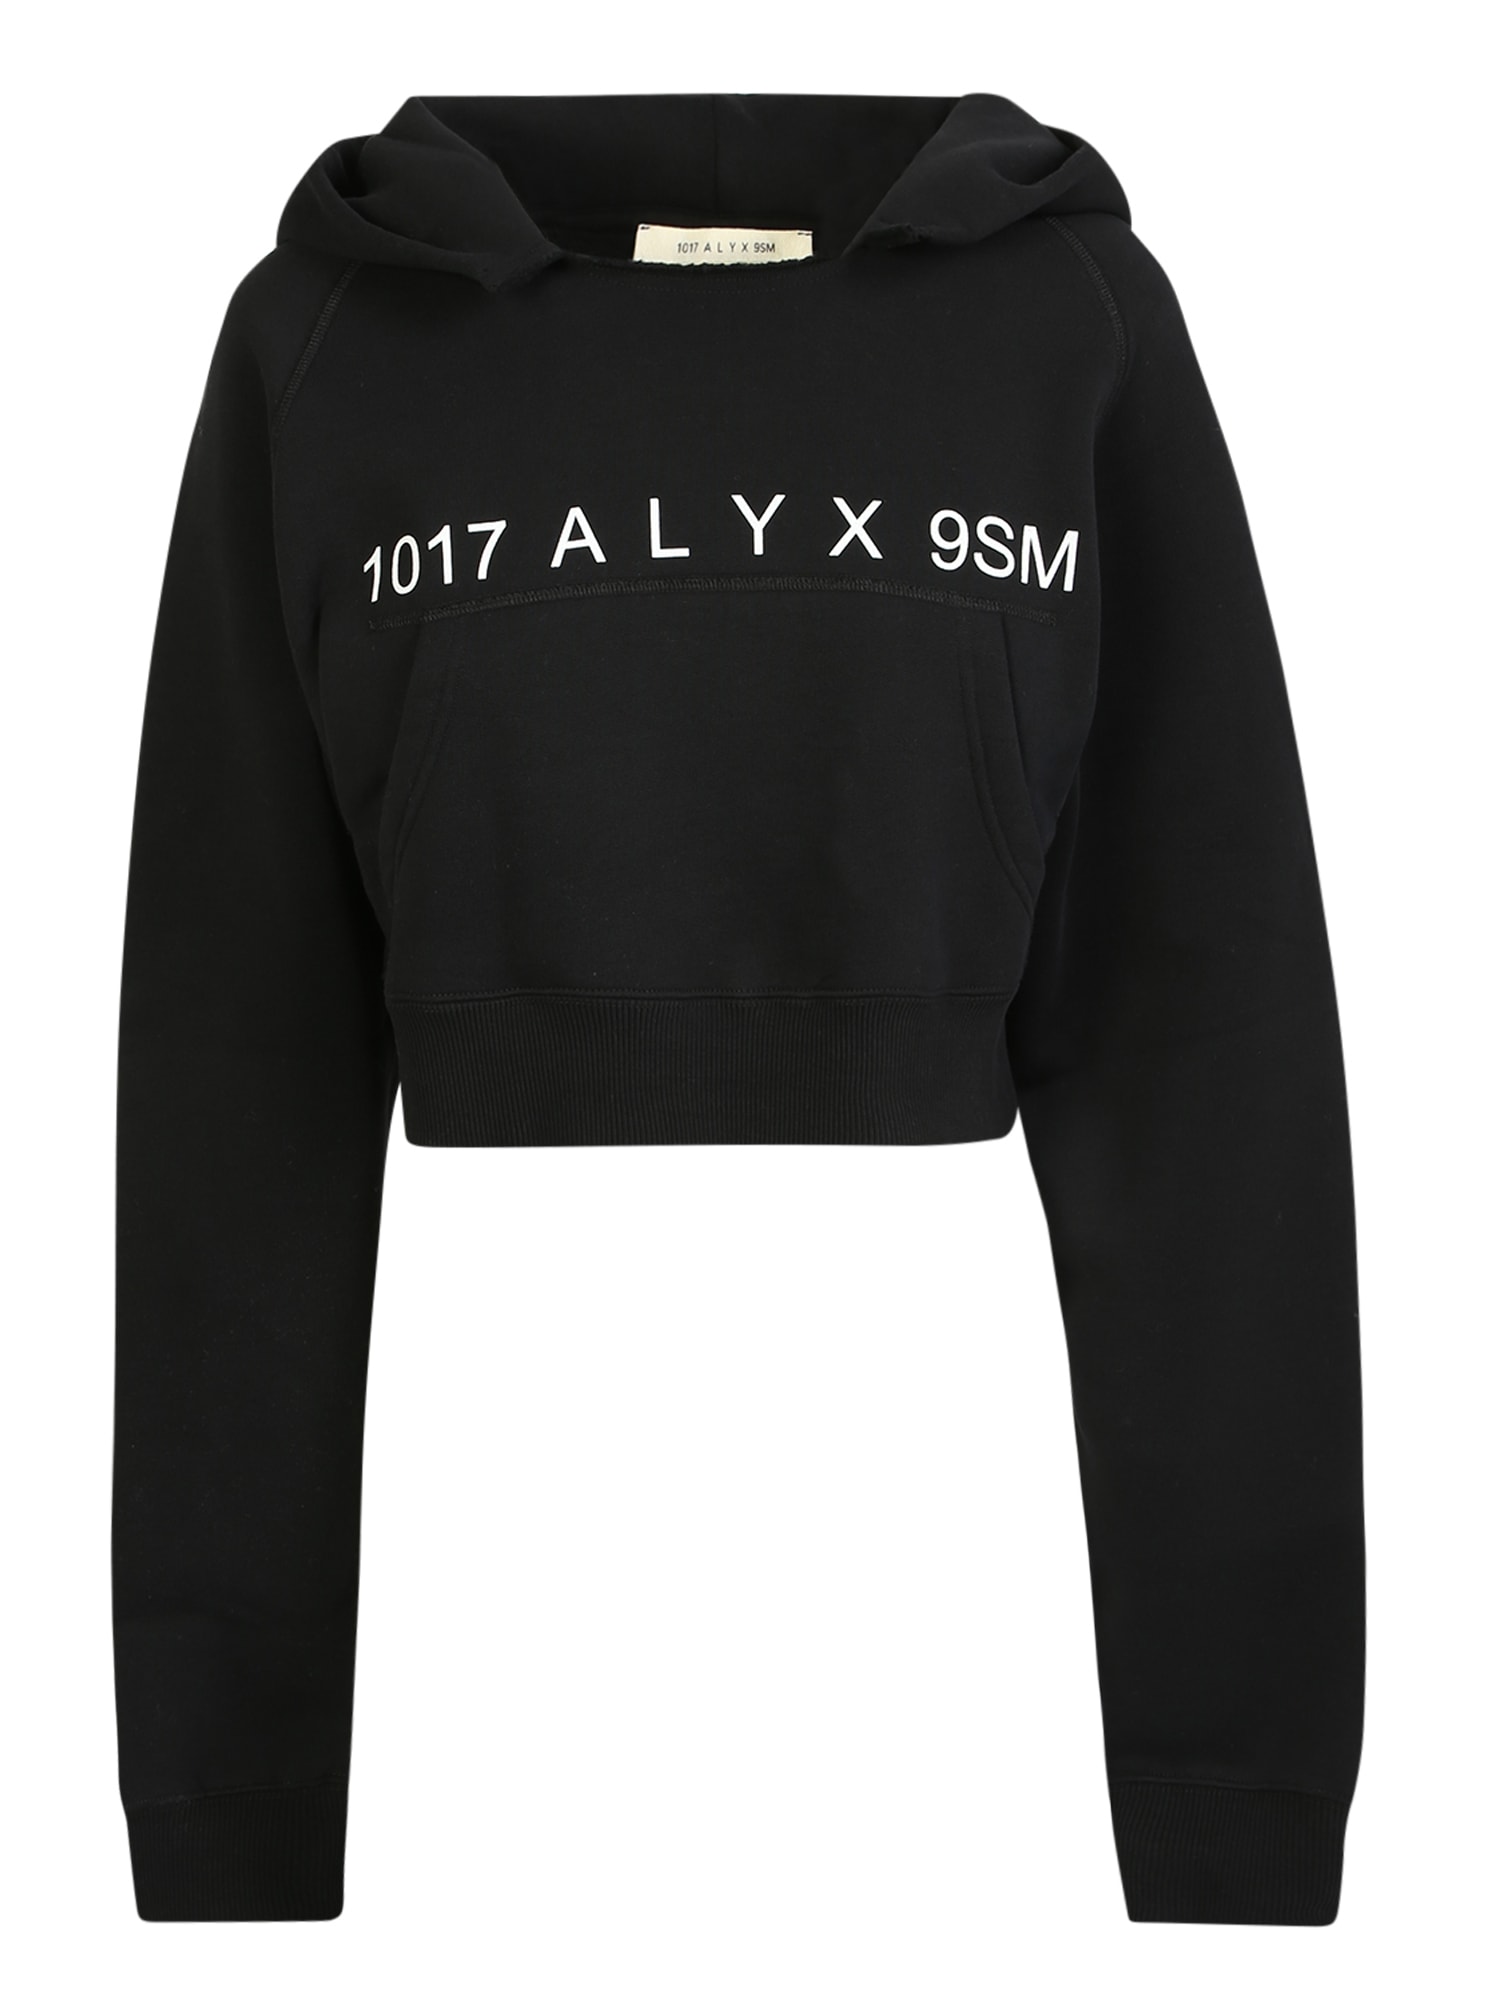 1017 Alyx 9sm Hooded Sweatshirt With A Contemporary Line